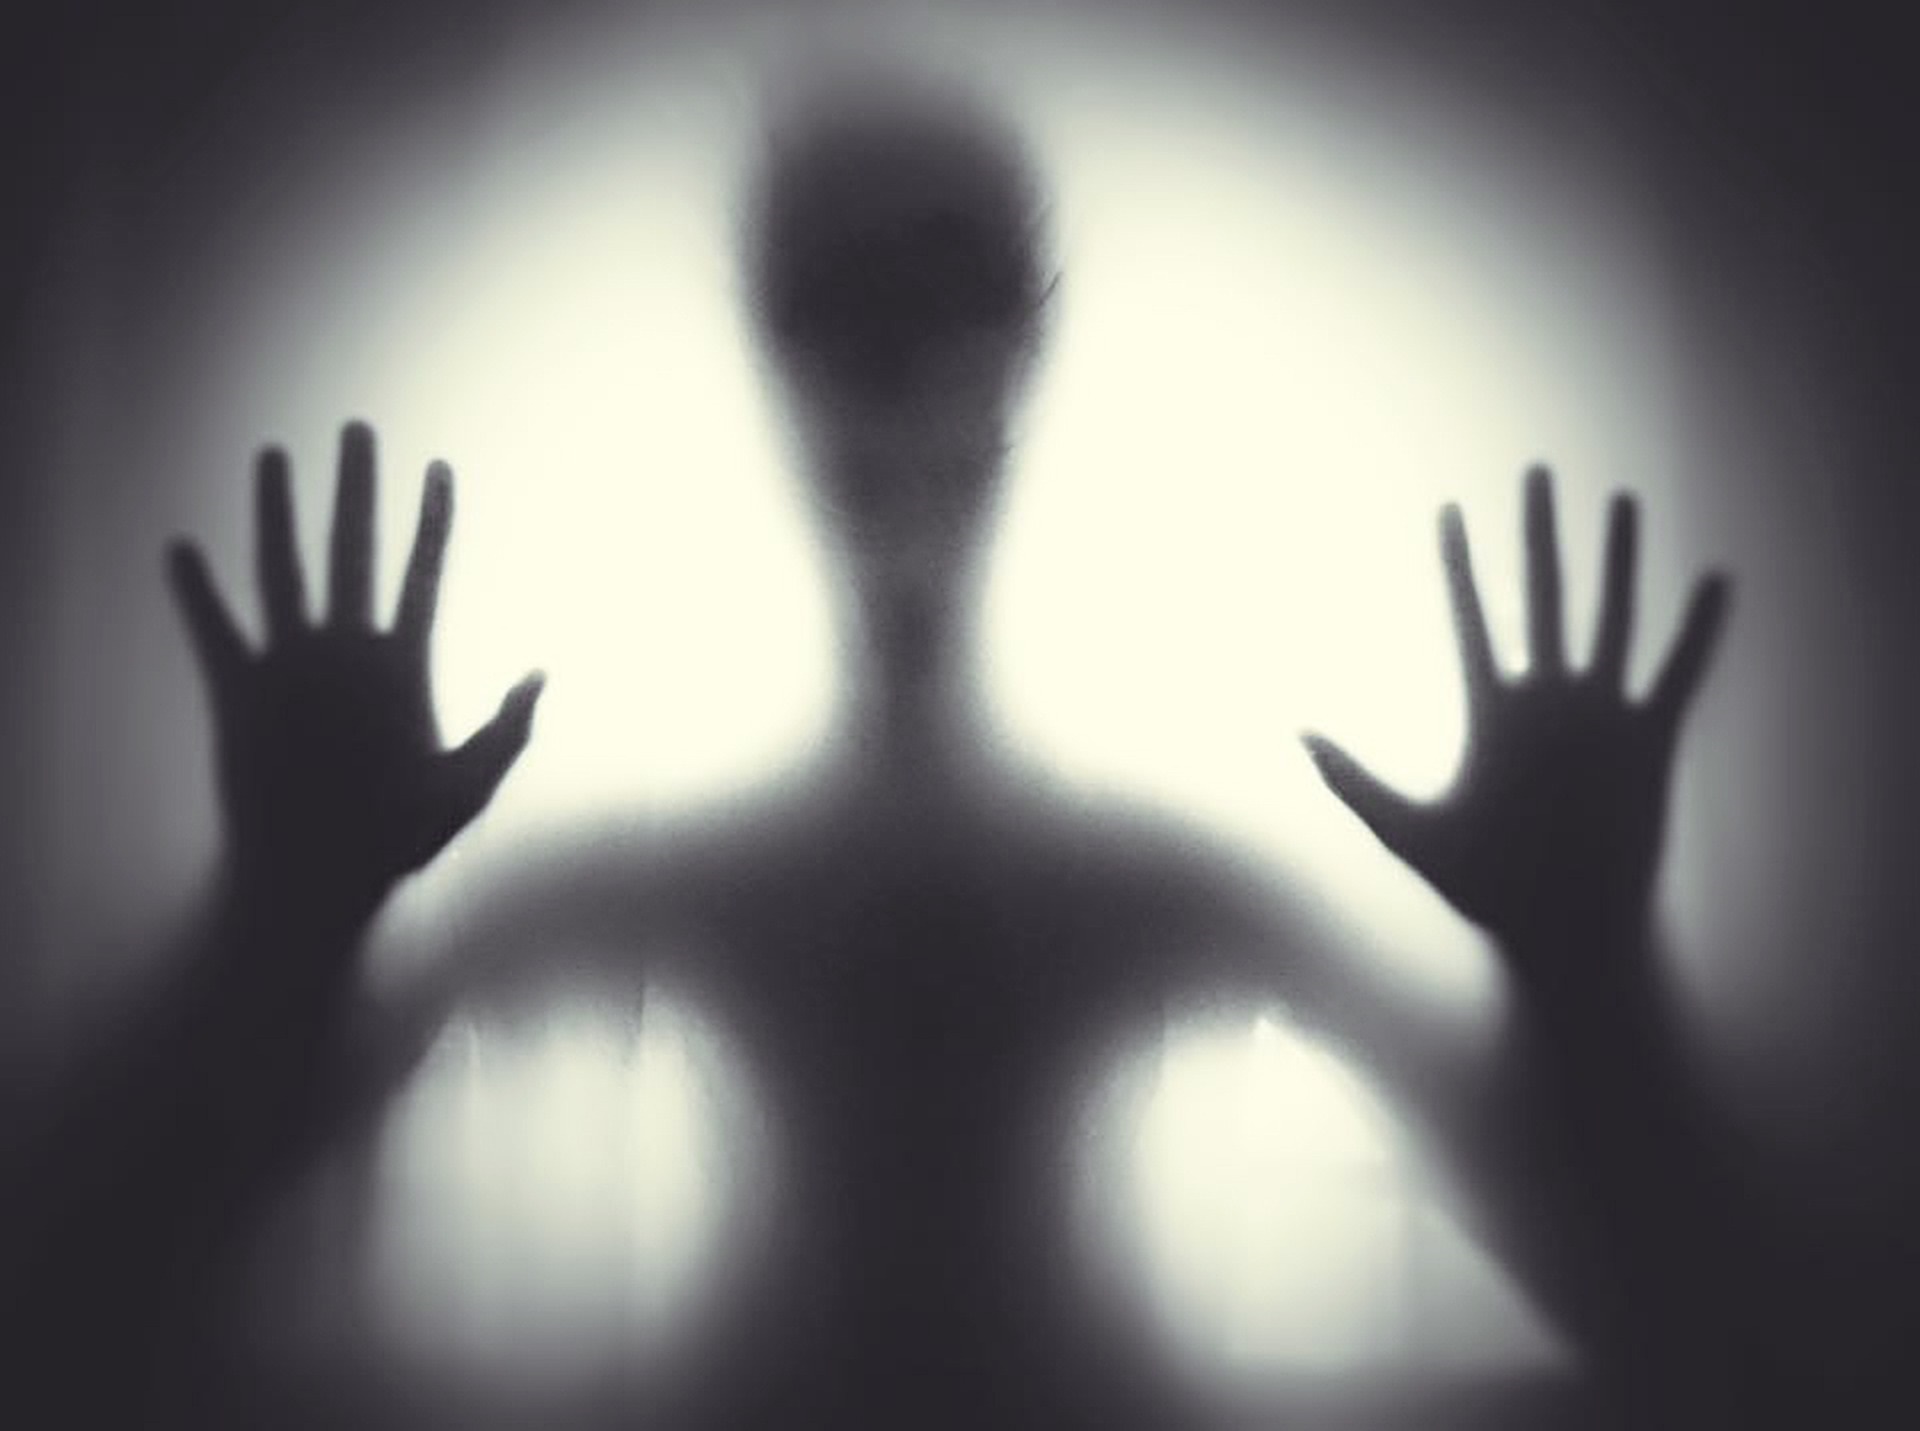 A silhouette of a person with their hands on the screen is illuminated ominously